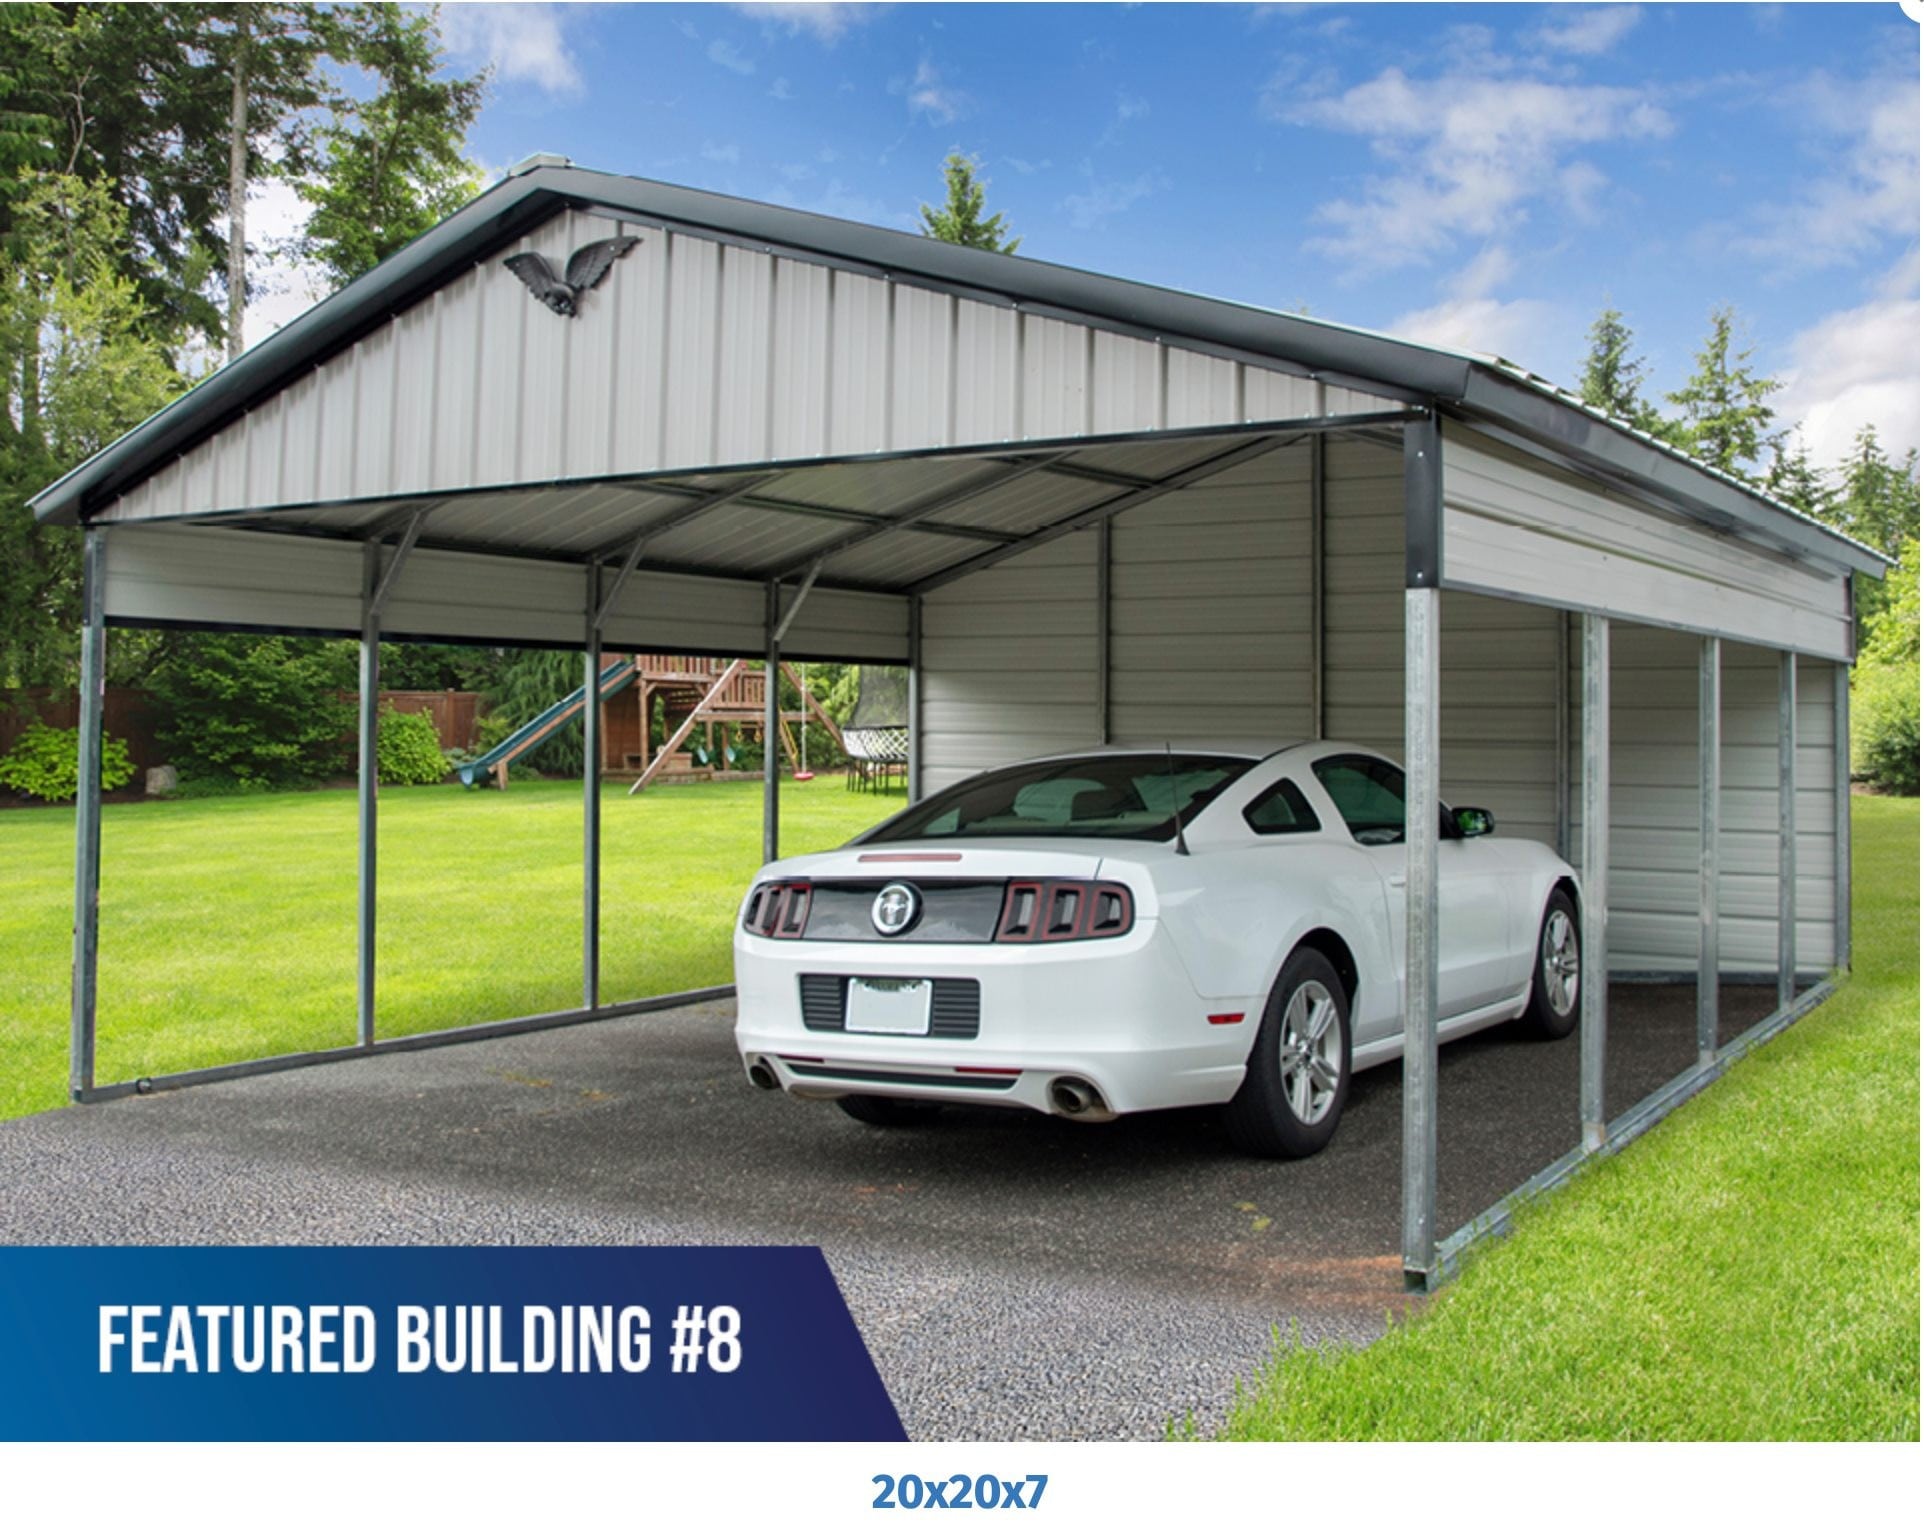 Eagle Carport With Vertical Roof, 2- Split Panels On The Sides With 1- End Wall Enclosed, 1- End Gable.